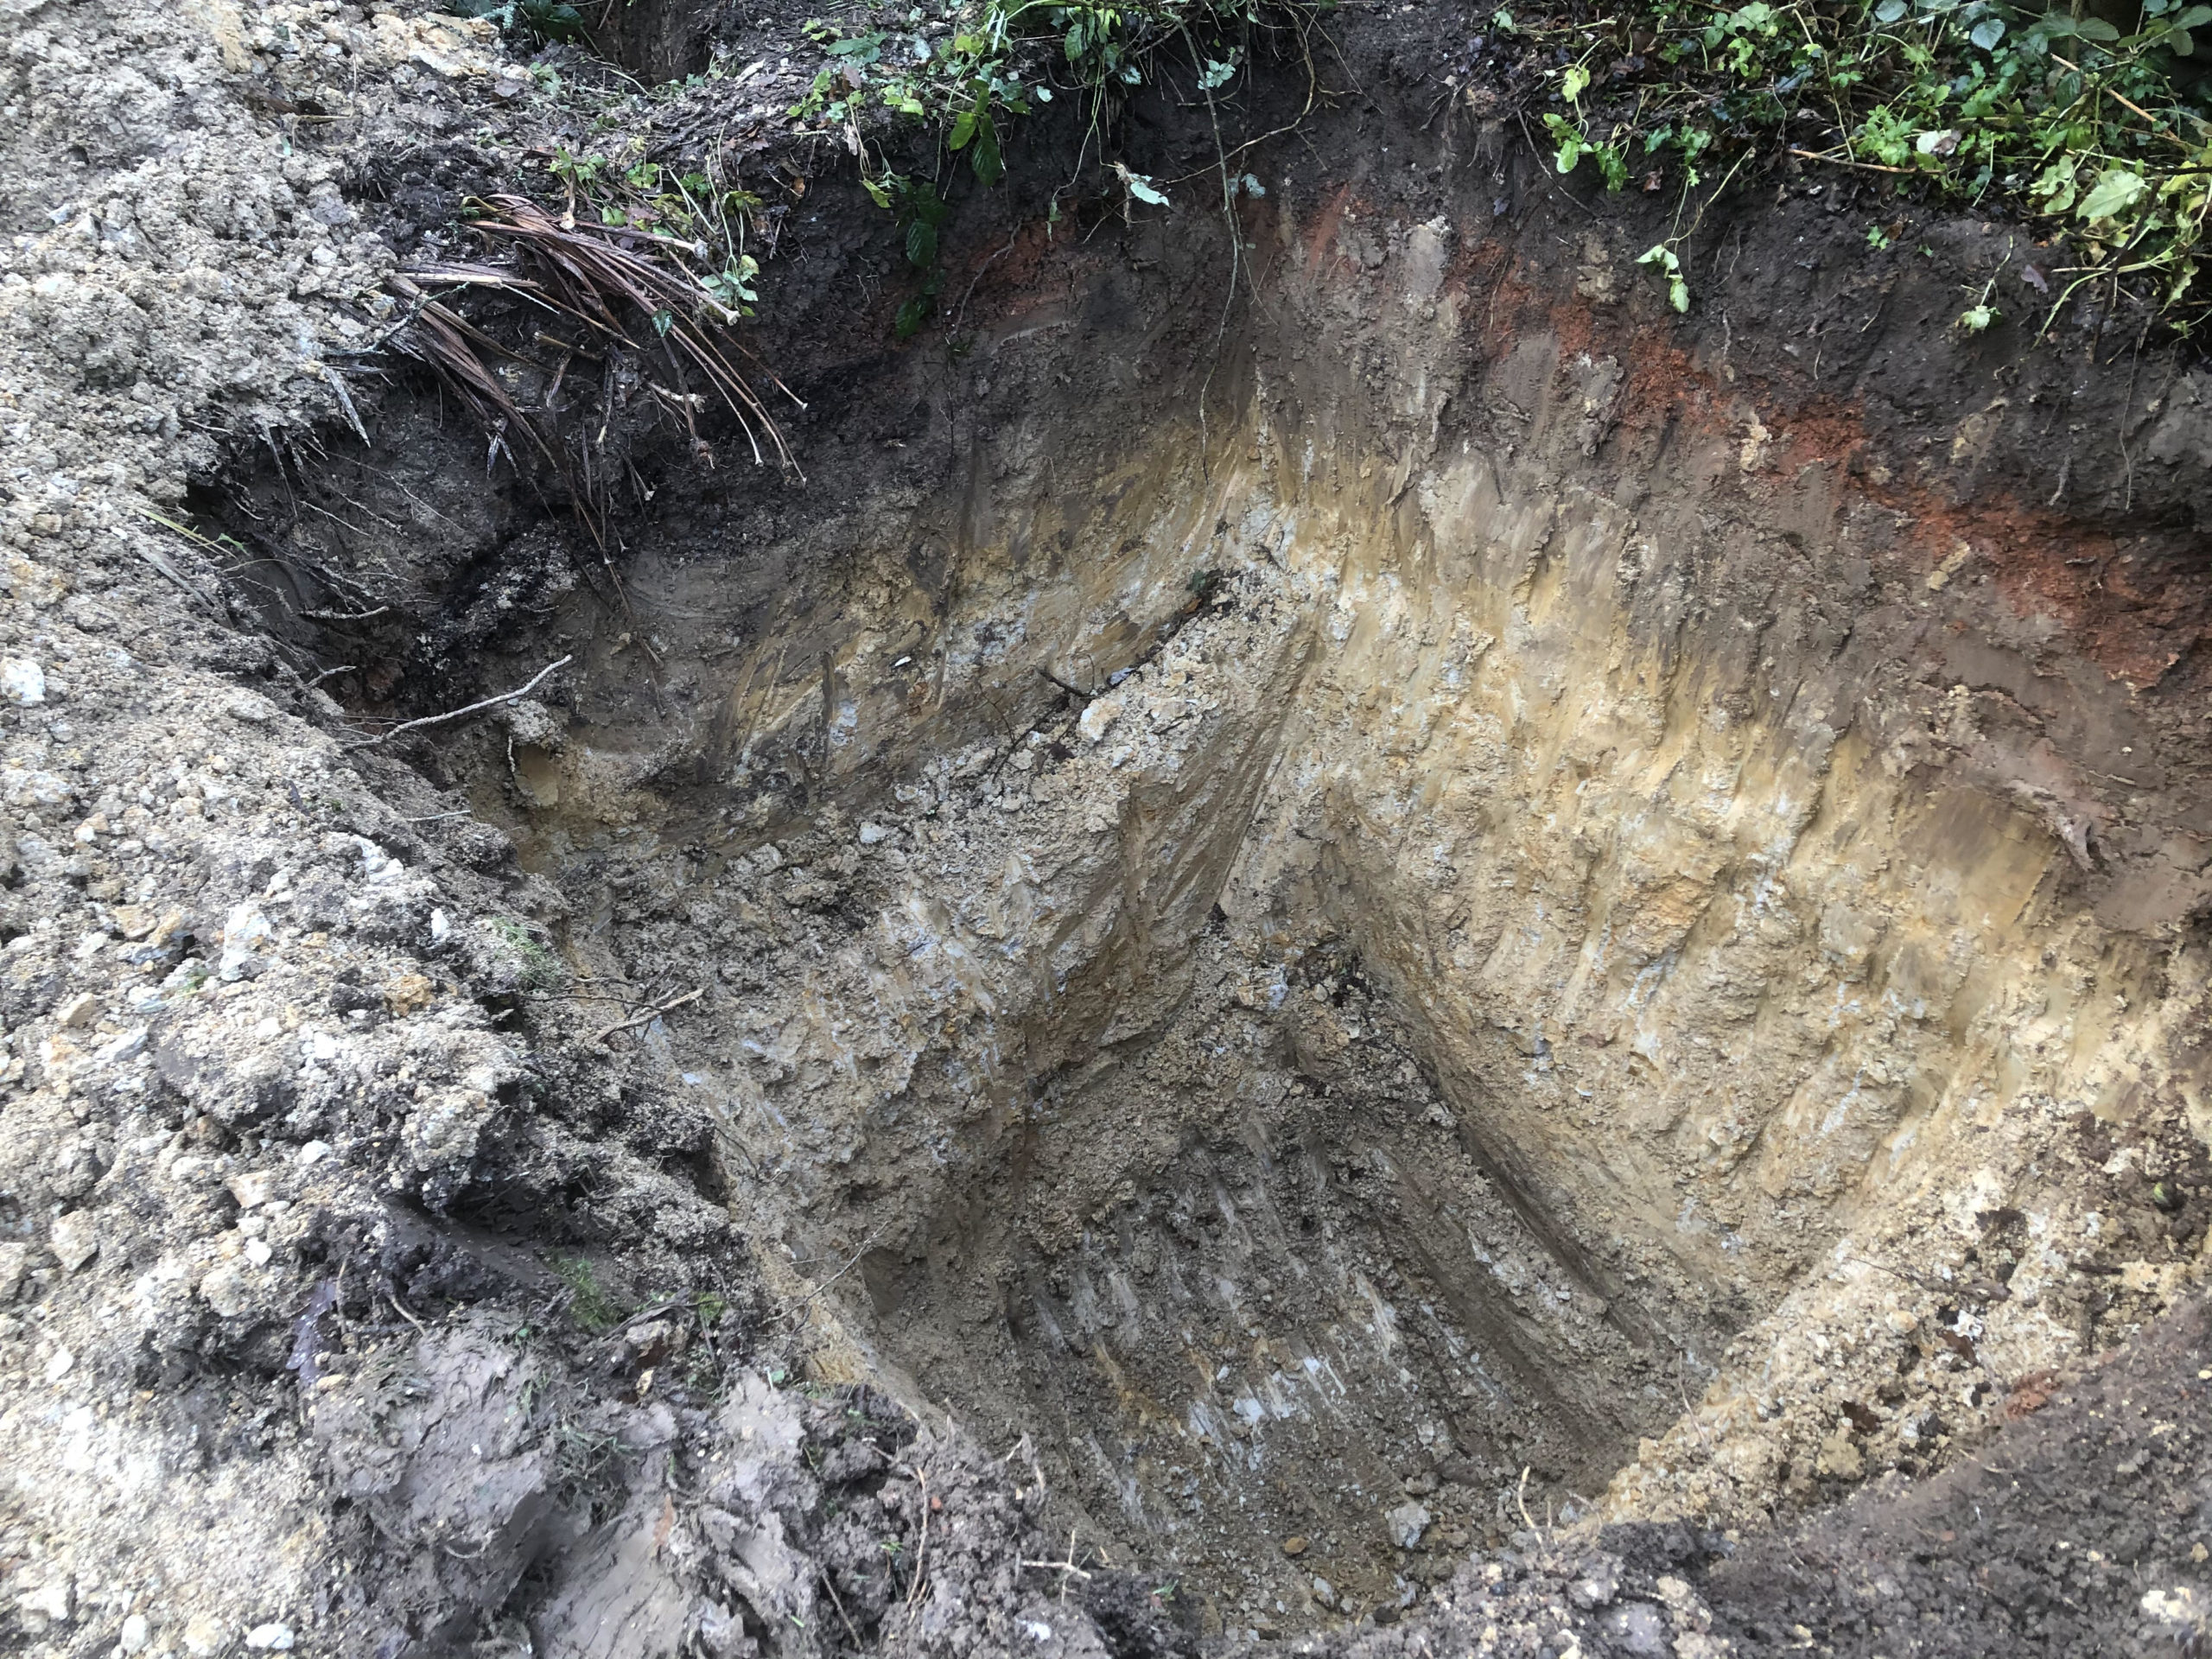 sewage treatment plant installation east sussex beginning to dig